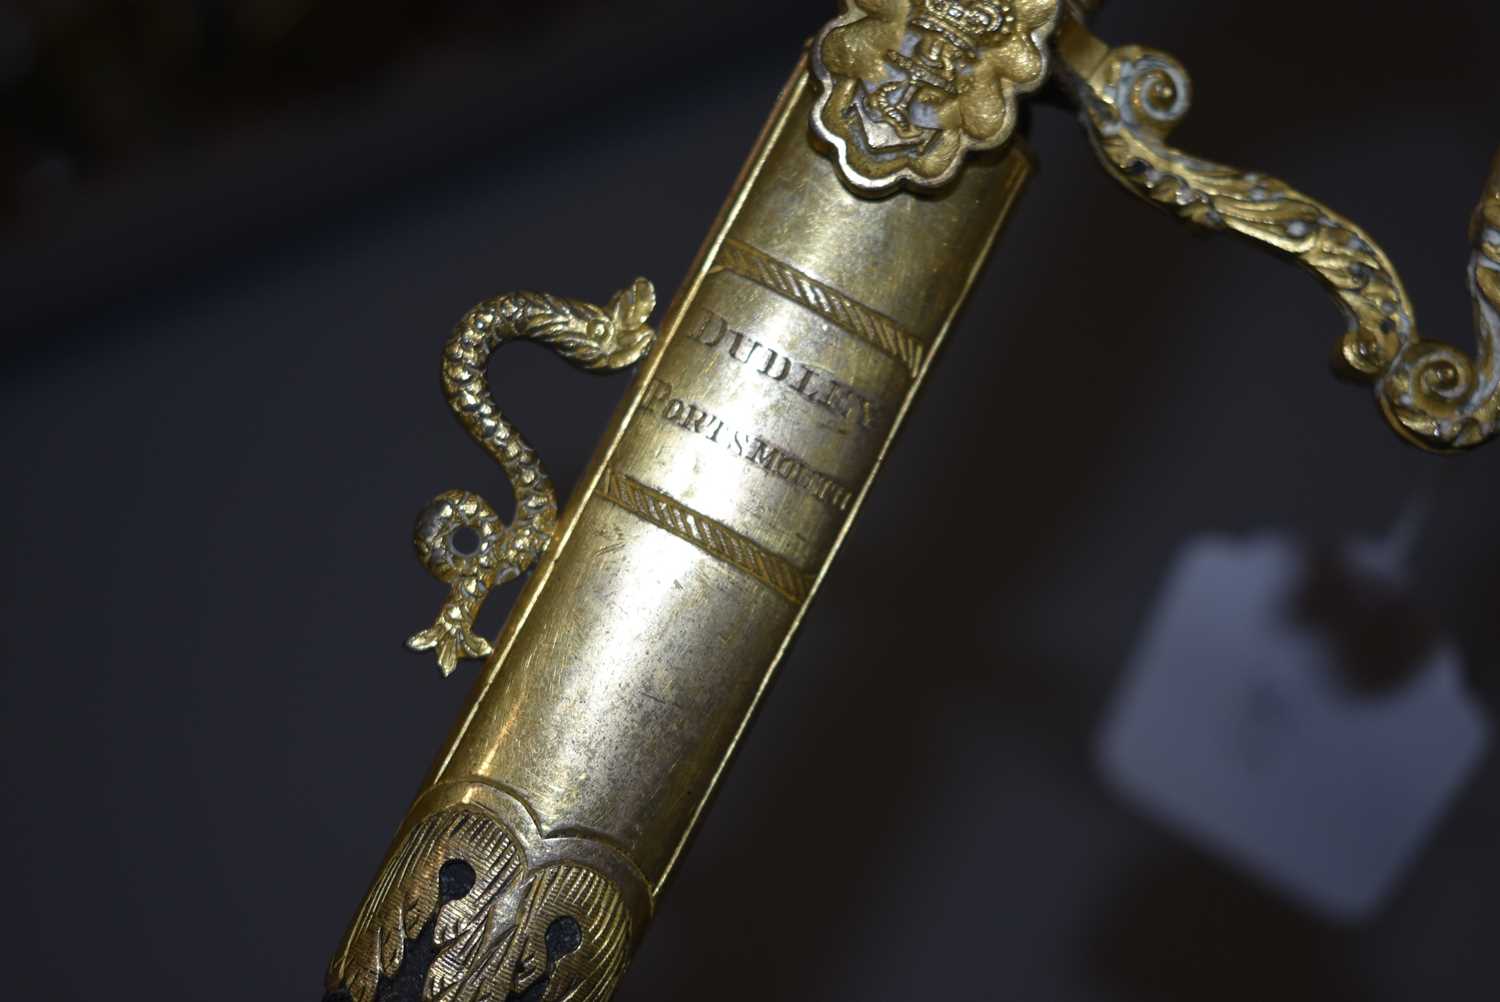 AN ORNATELY MOUNTED GEORGIAN NAVAL OFFICER'S SWORD, - Image 12 of 18